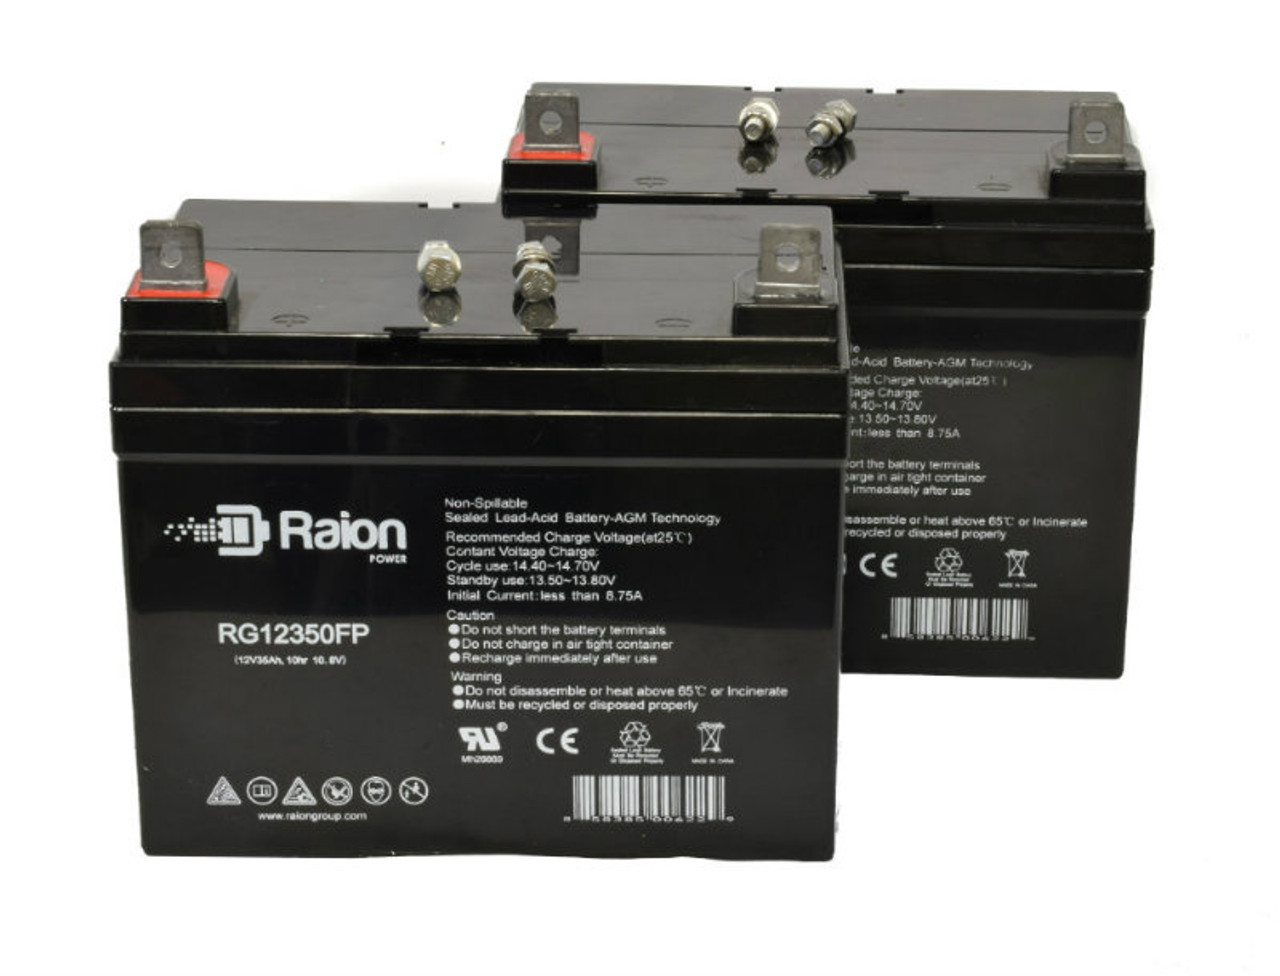 Raion Power Replacement 12V 35Ah Group U1 Battery for Narada 6-FM-33 - 2 Pack